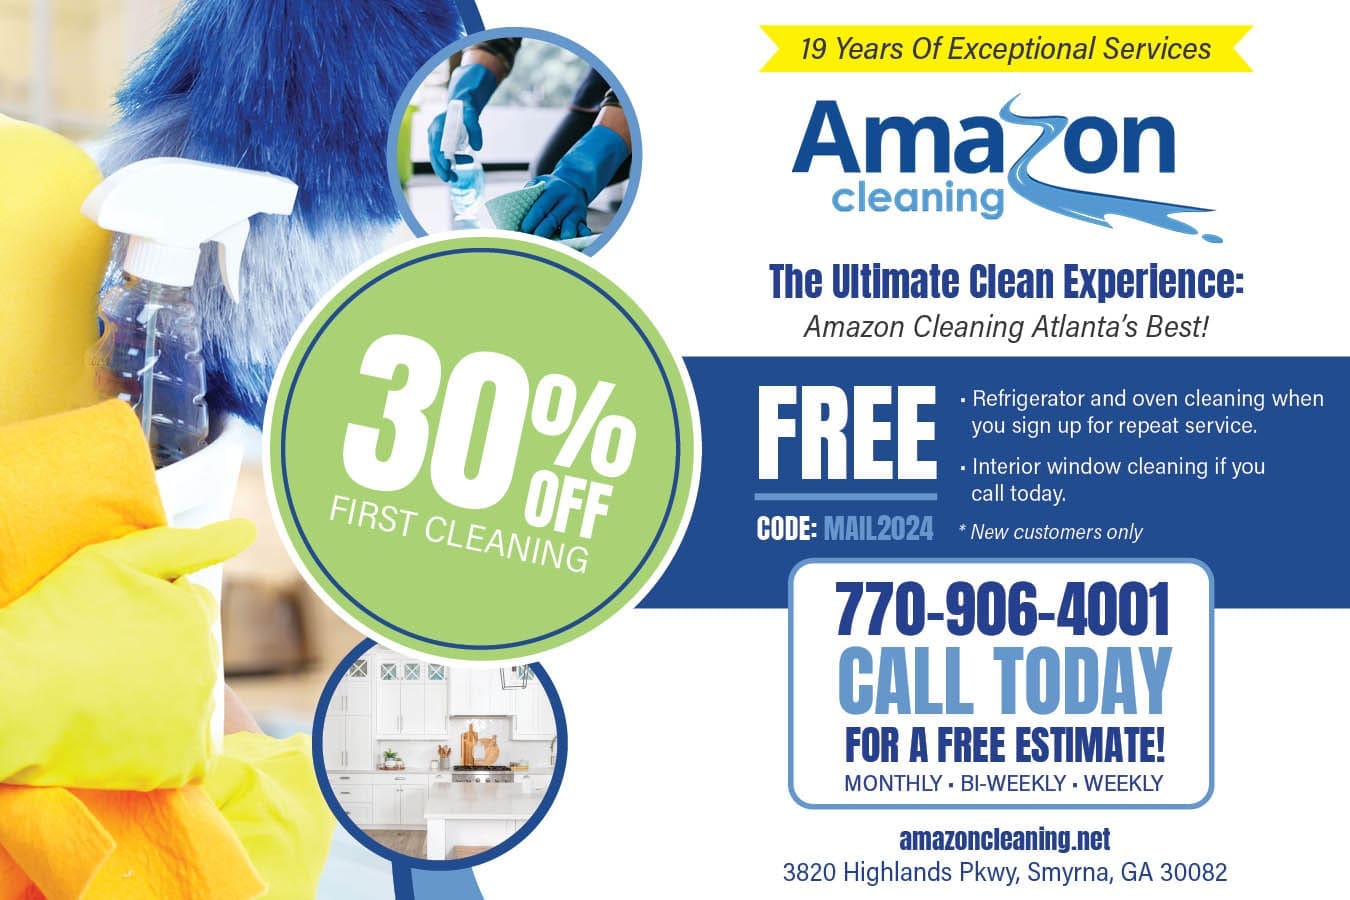 First Cleaning Offer - 30% Off Coupon From Amazon Cleaning